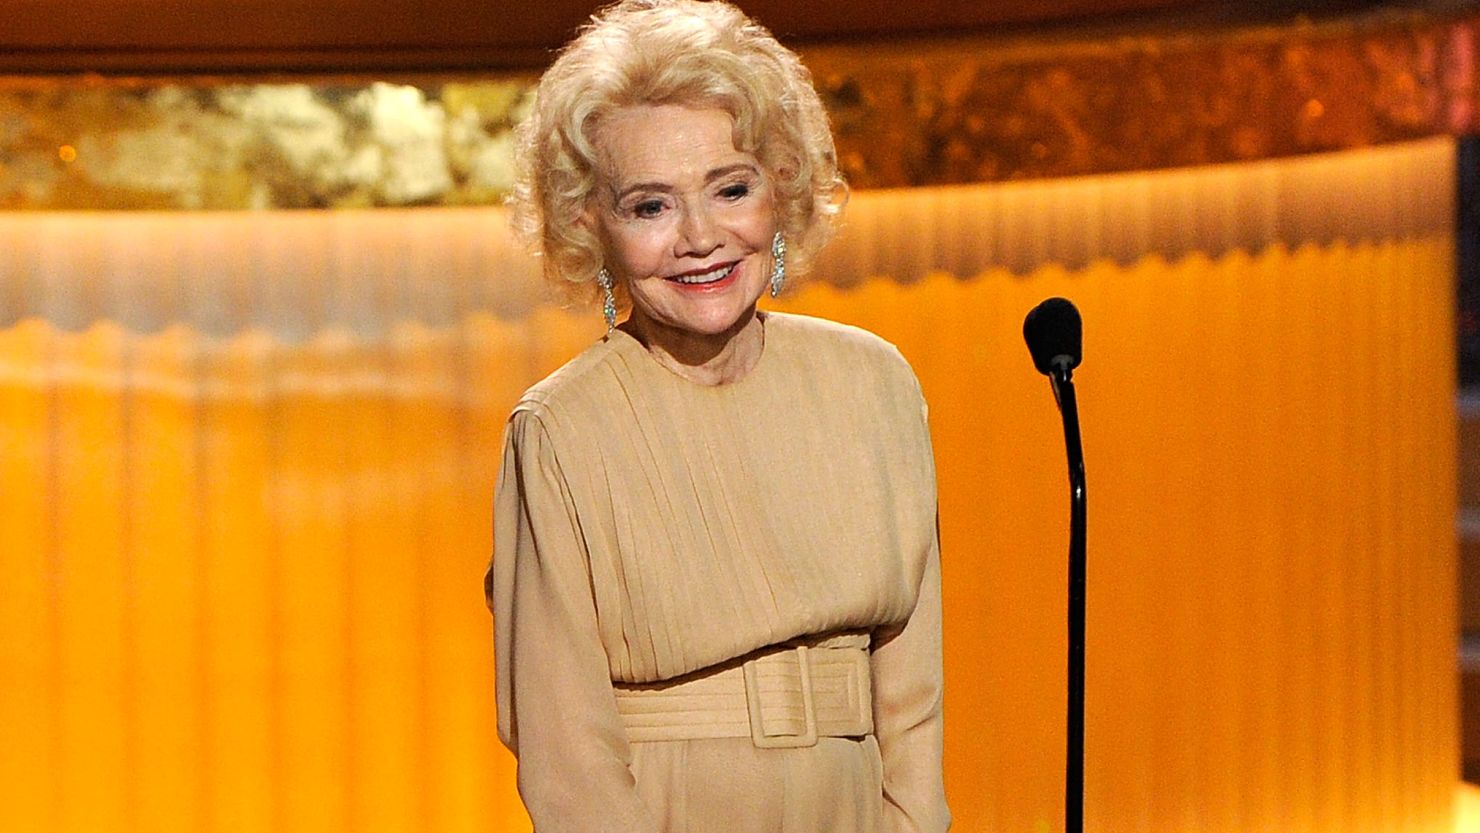  Agnes Nixon speaks onstage at the 37th Annual Daytime Entertainment Emmy Awards held at the Las Vegas Hilton on June 27, 2010 in Las Vegas, Nevada.  (Photo by Ethan Miller/Getty Images)